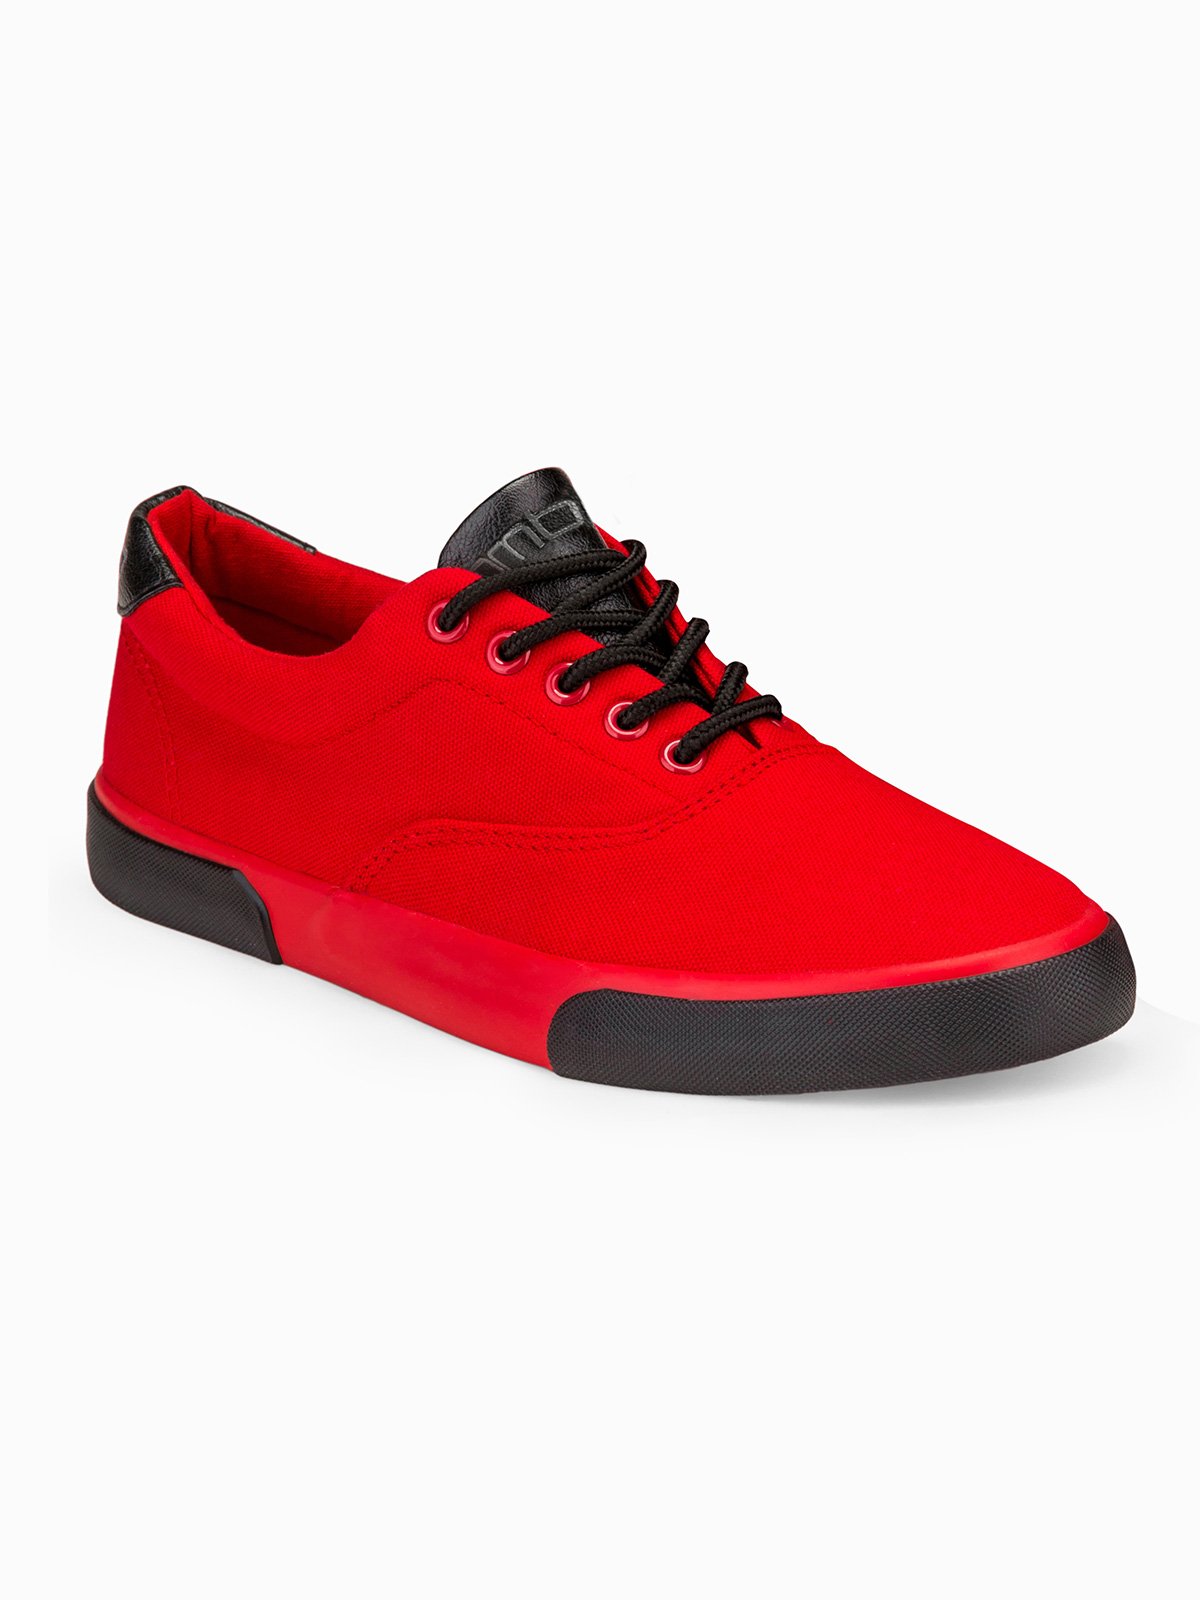 Men's slip on trainers T300 - red 